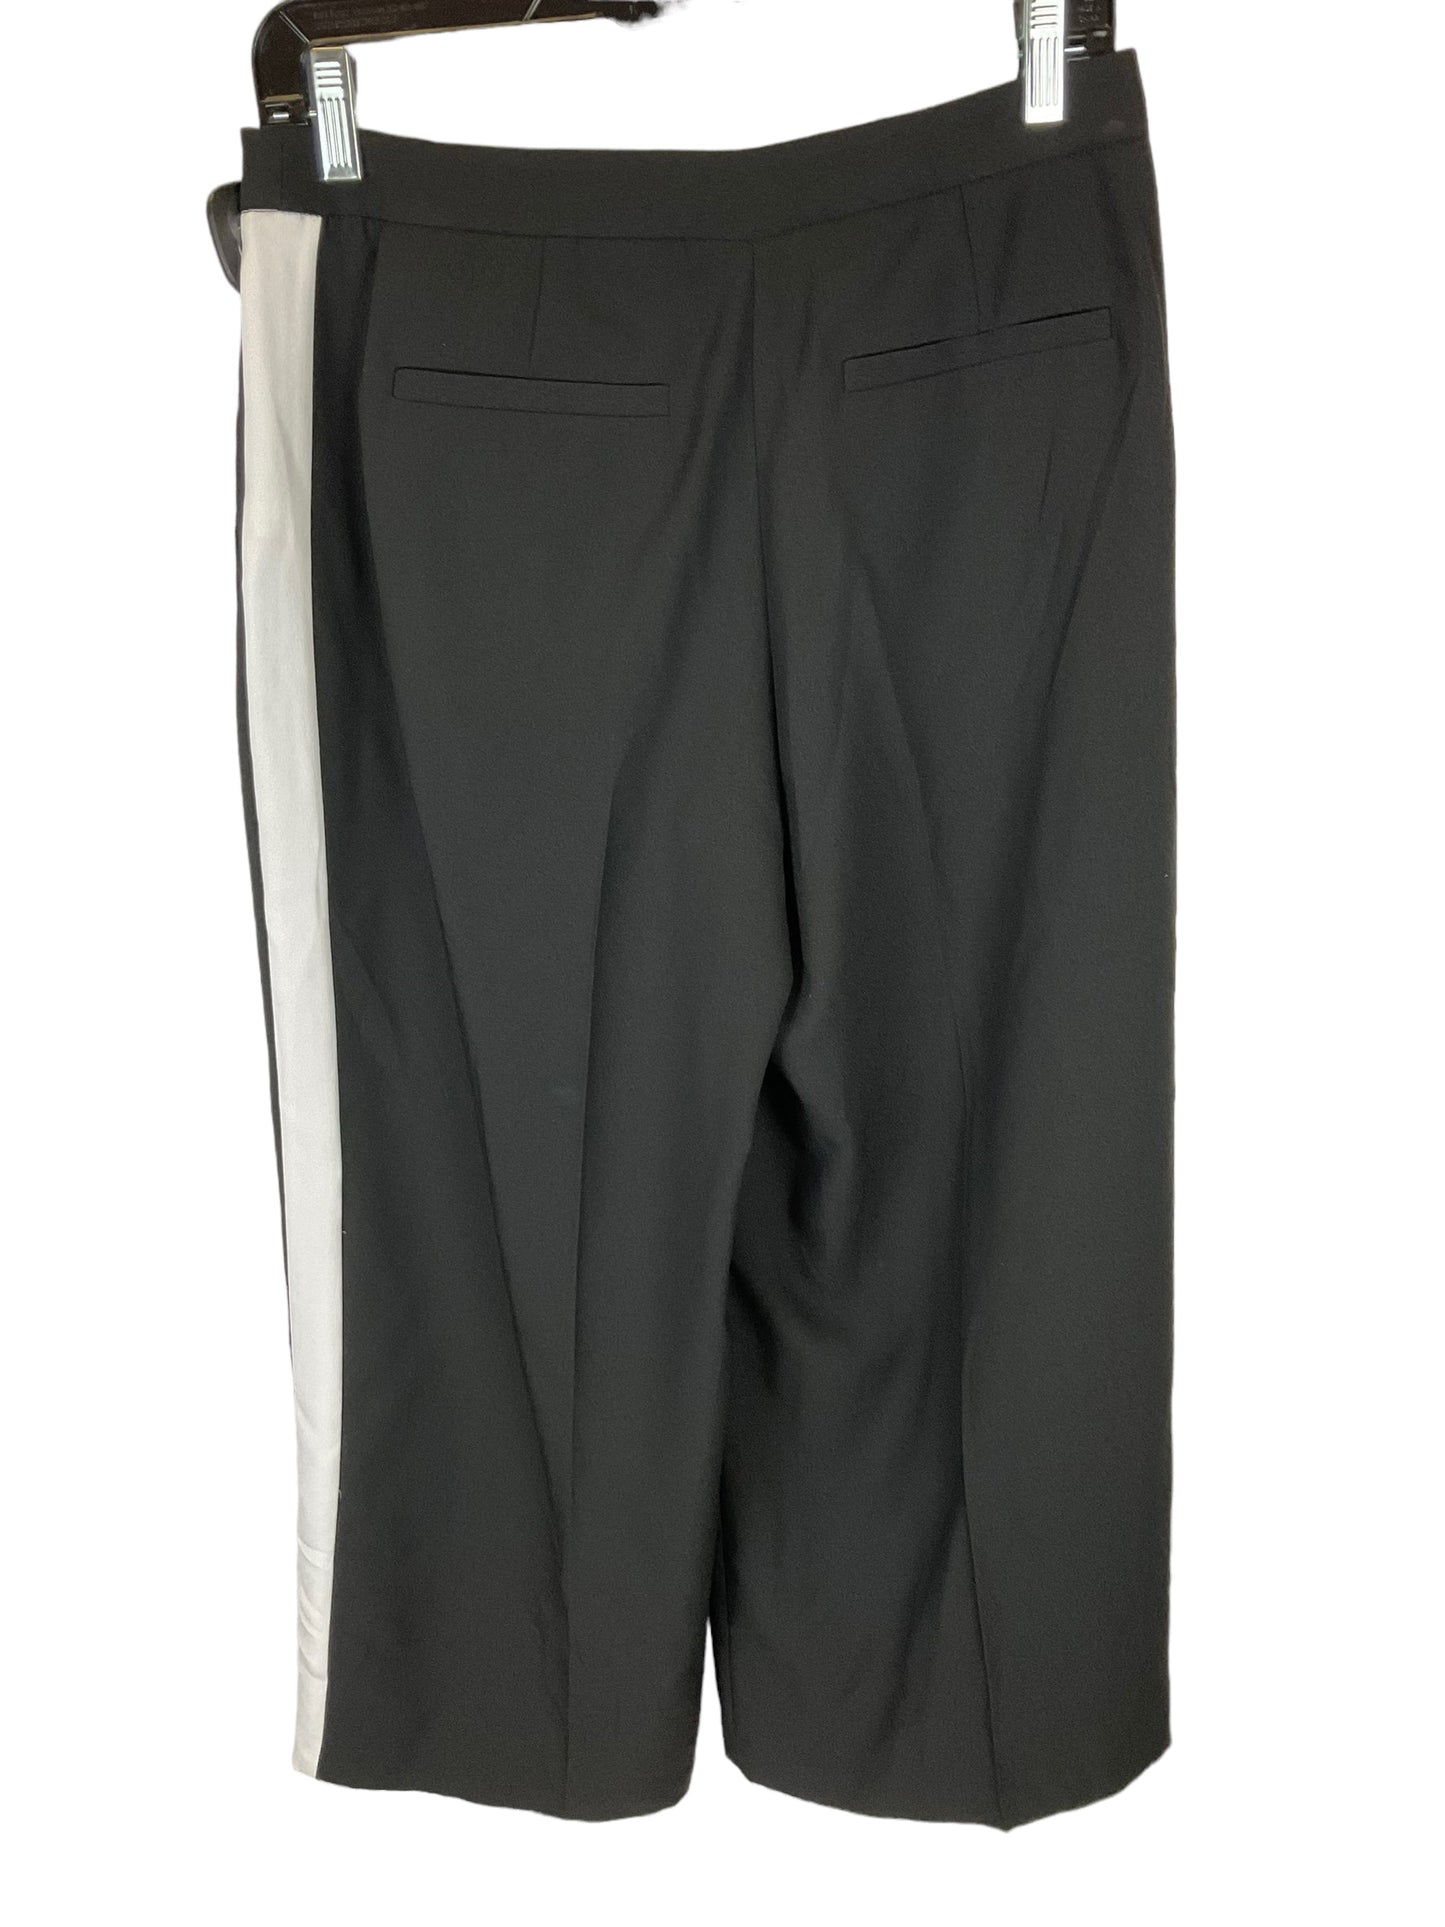 Pants Ankle By Michael By Michael Kors  Size: 4